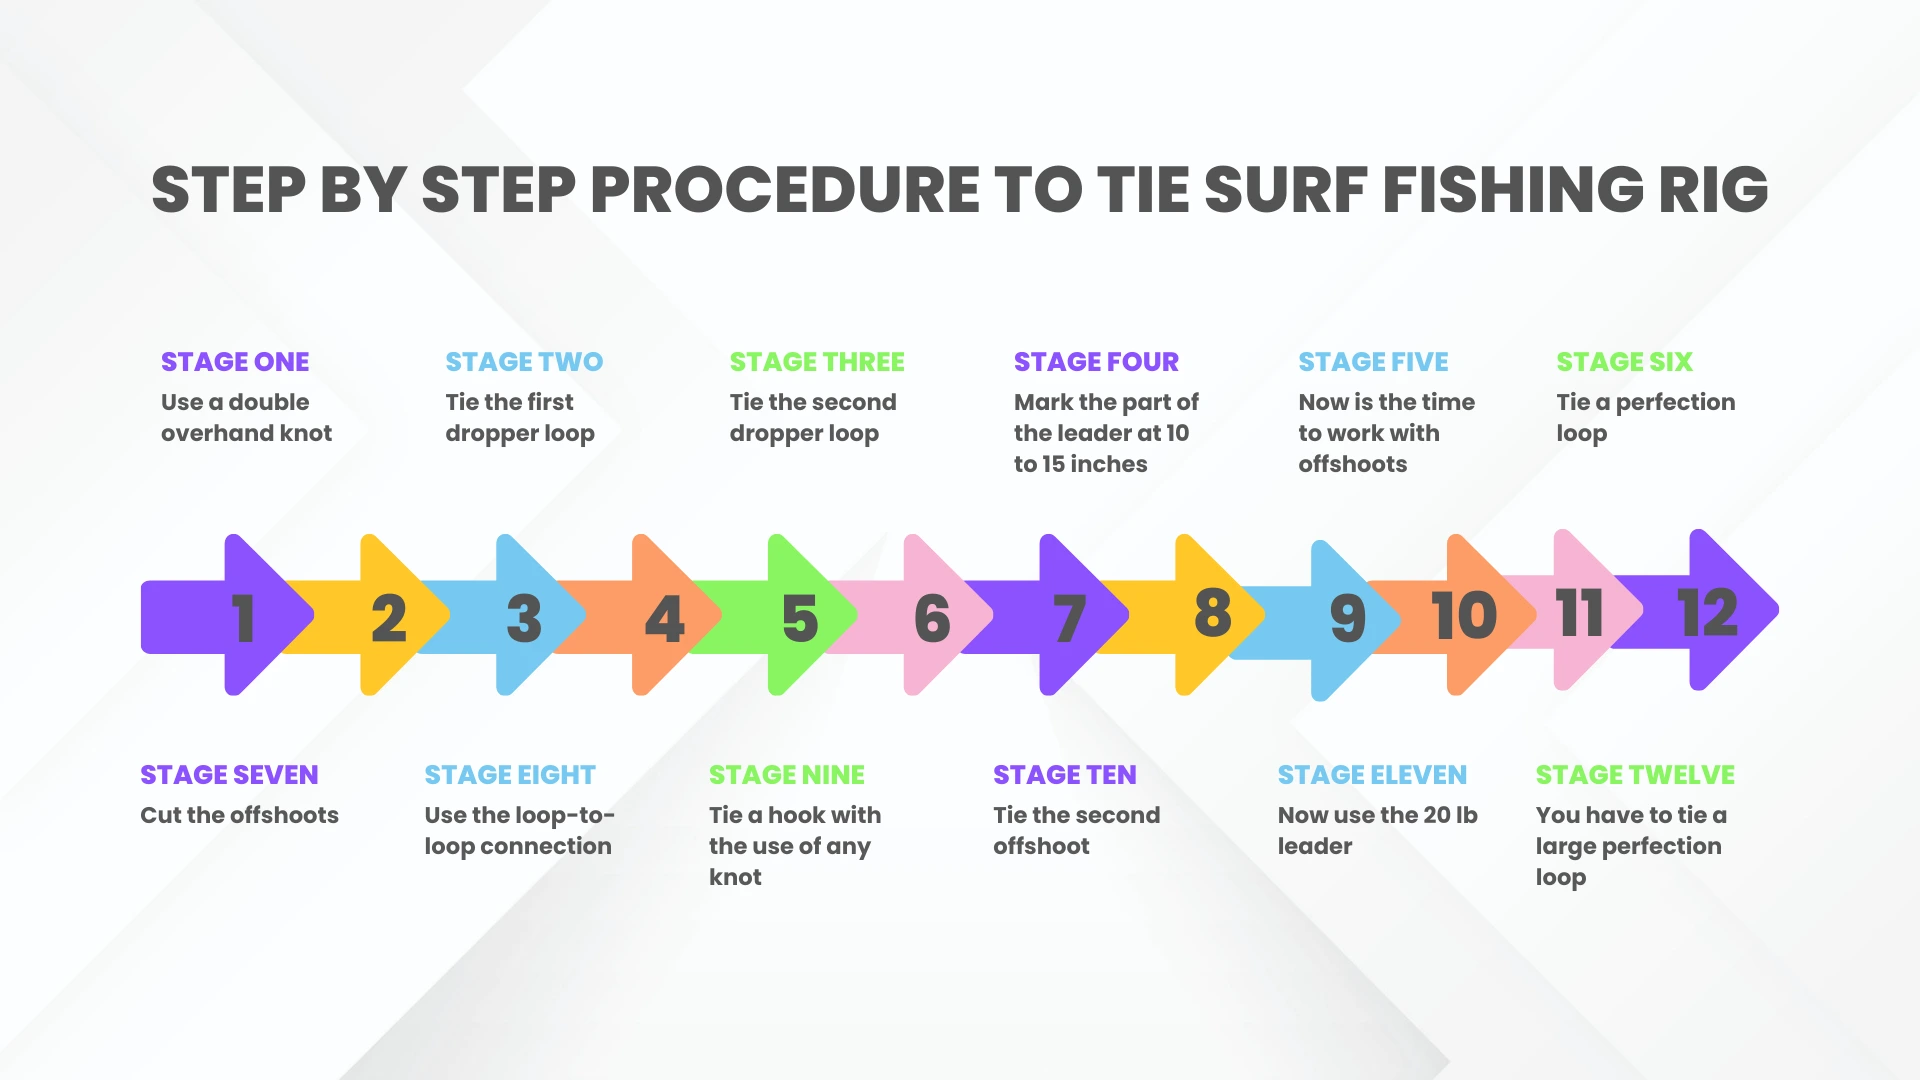 Step By Step Procedure To Tie Surf Fishing Rig